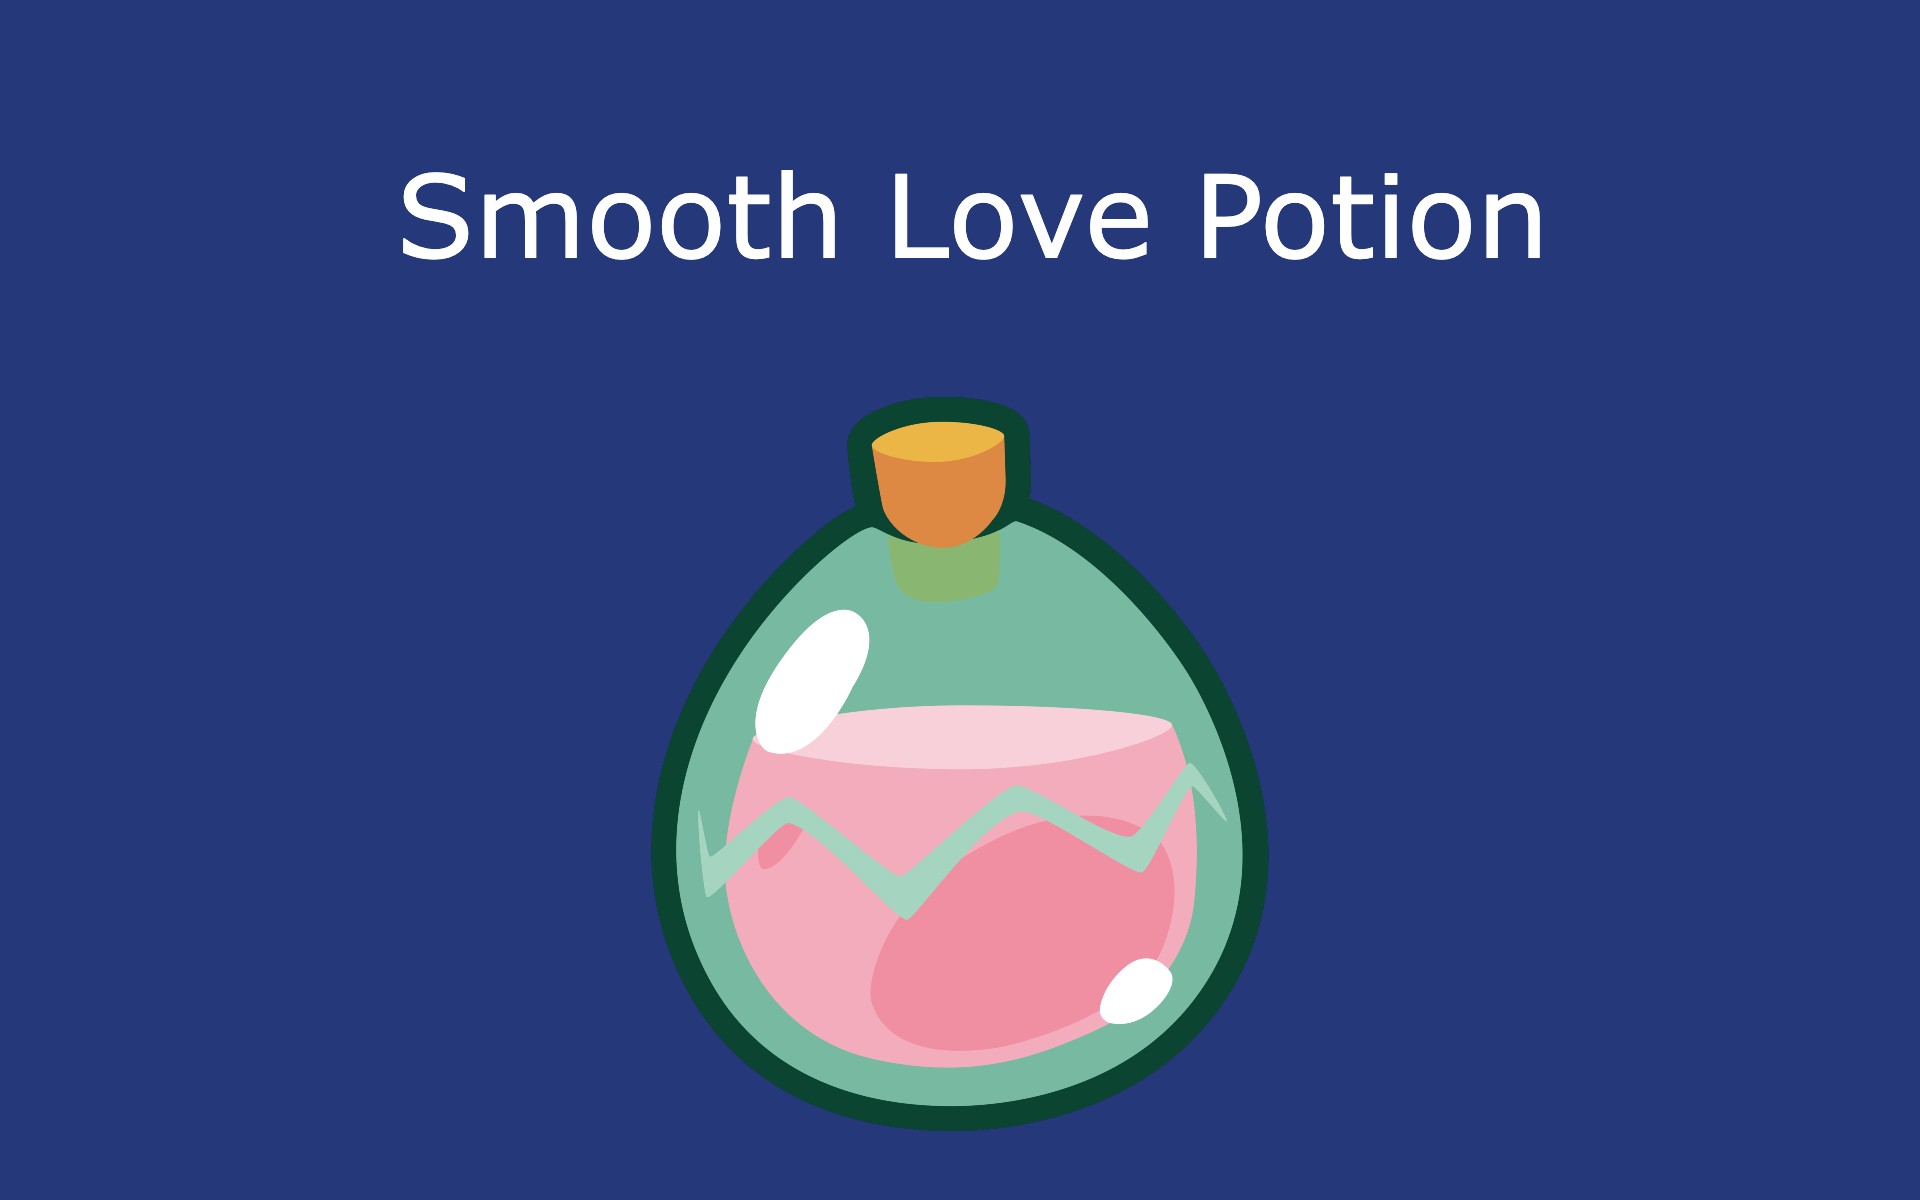 Smooth love potion